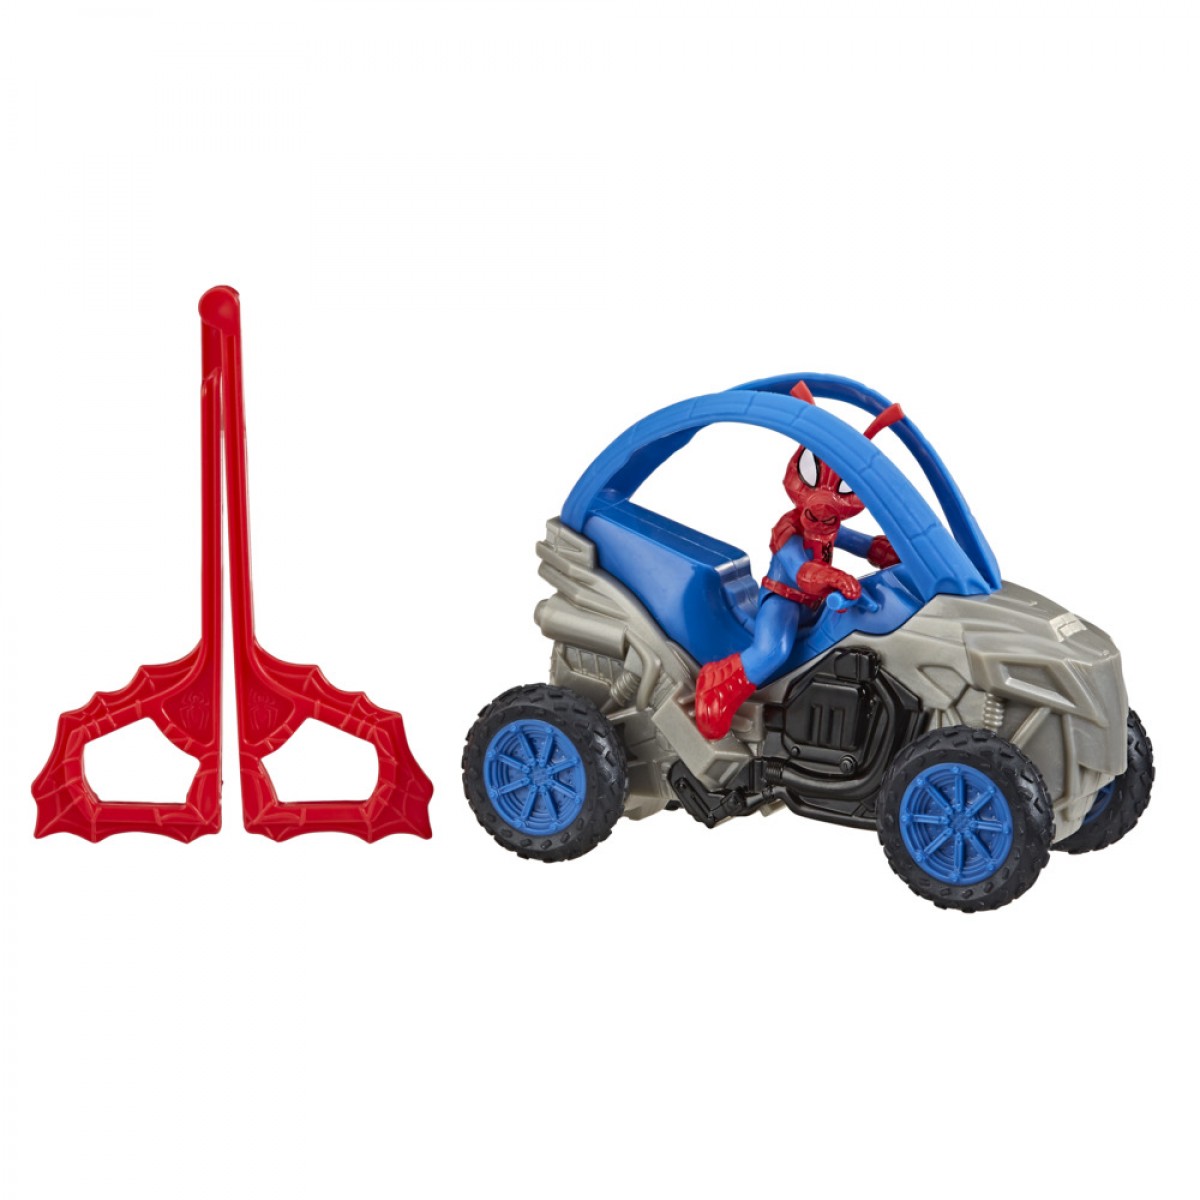 Marvel Spider-Man: Spider-Ham Stunt Vehicle 6-Inch-Scale Super Hero Action Figure And Vehicle Toy Great Kids For Ages 4 And Up